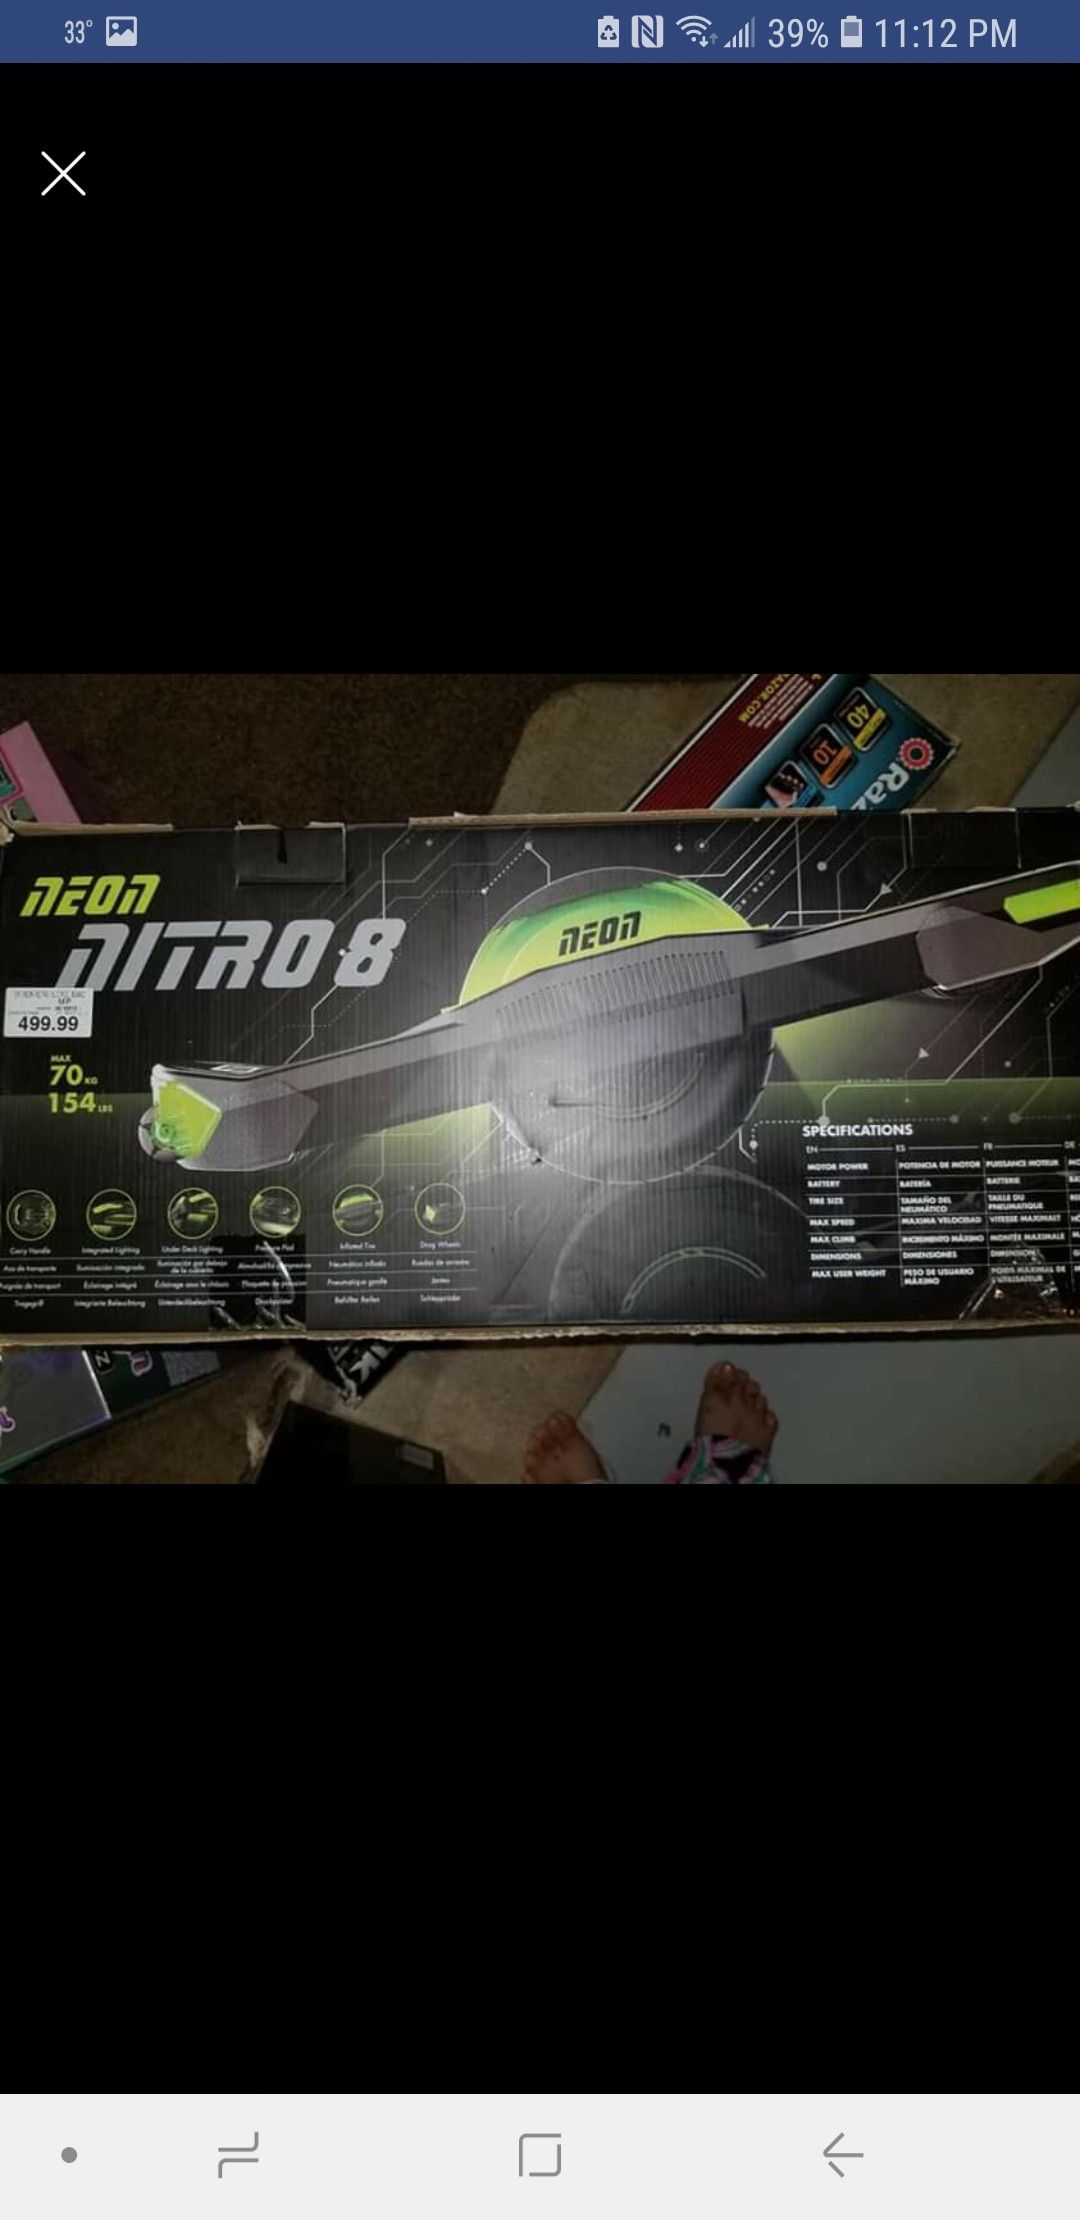 Neon nitro8 electric 1 wheel hoverboard over $450+tax originally $105 BRAND NEW NEVER OPENED/USED